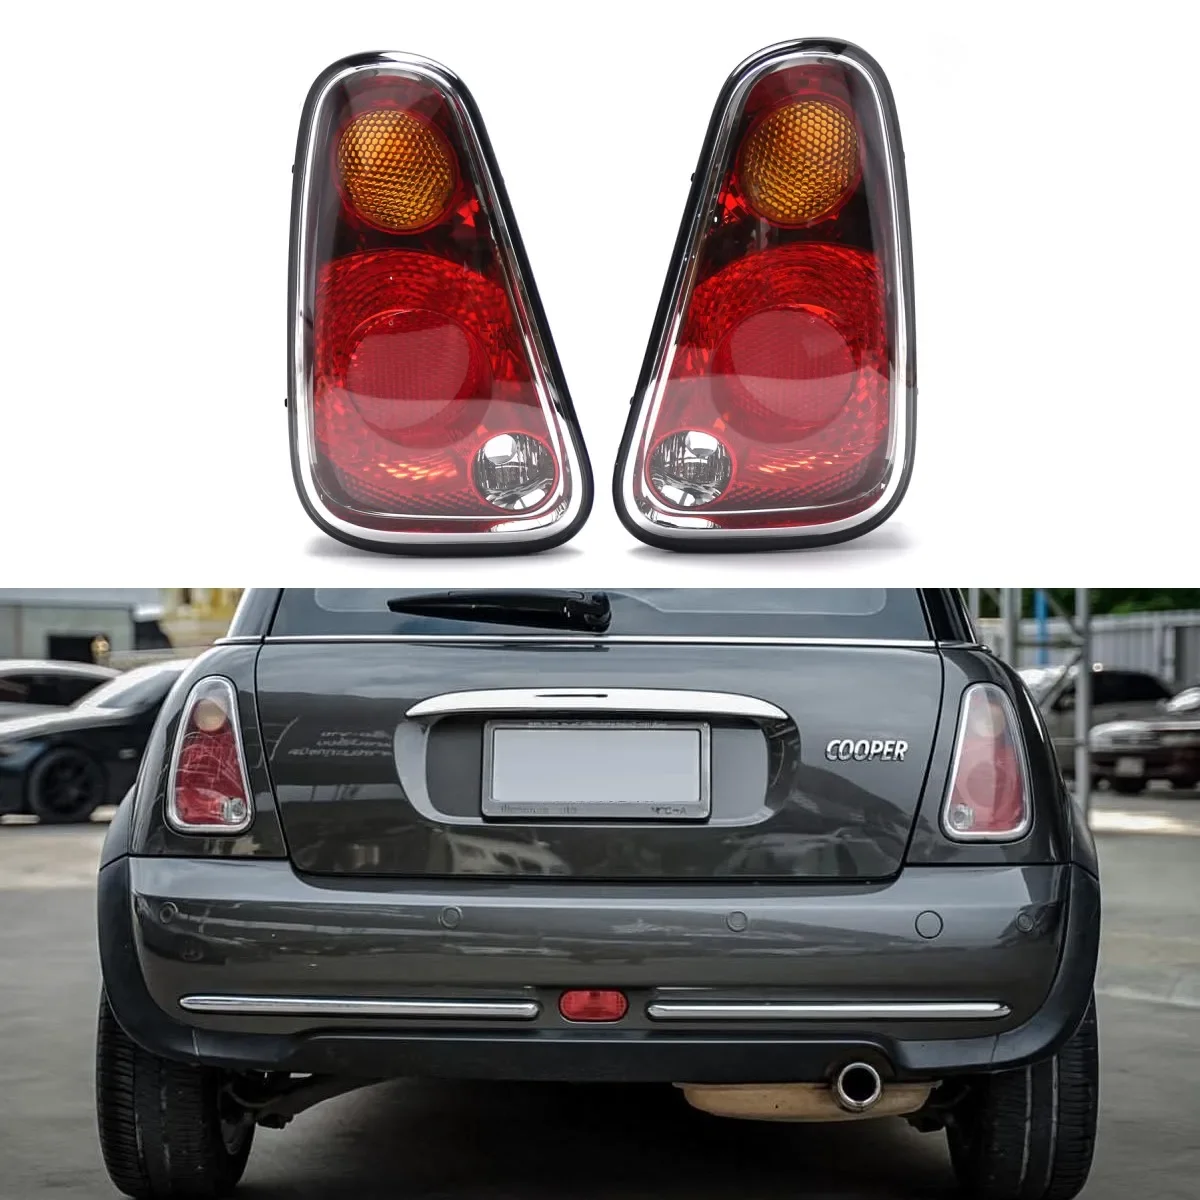 

Car Tail Light Rear Lamp Assembly Without Bulbs Left Right For MINI R50 R52 R53 2004-2008 63217166955 63217166957 63217166956